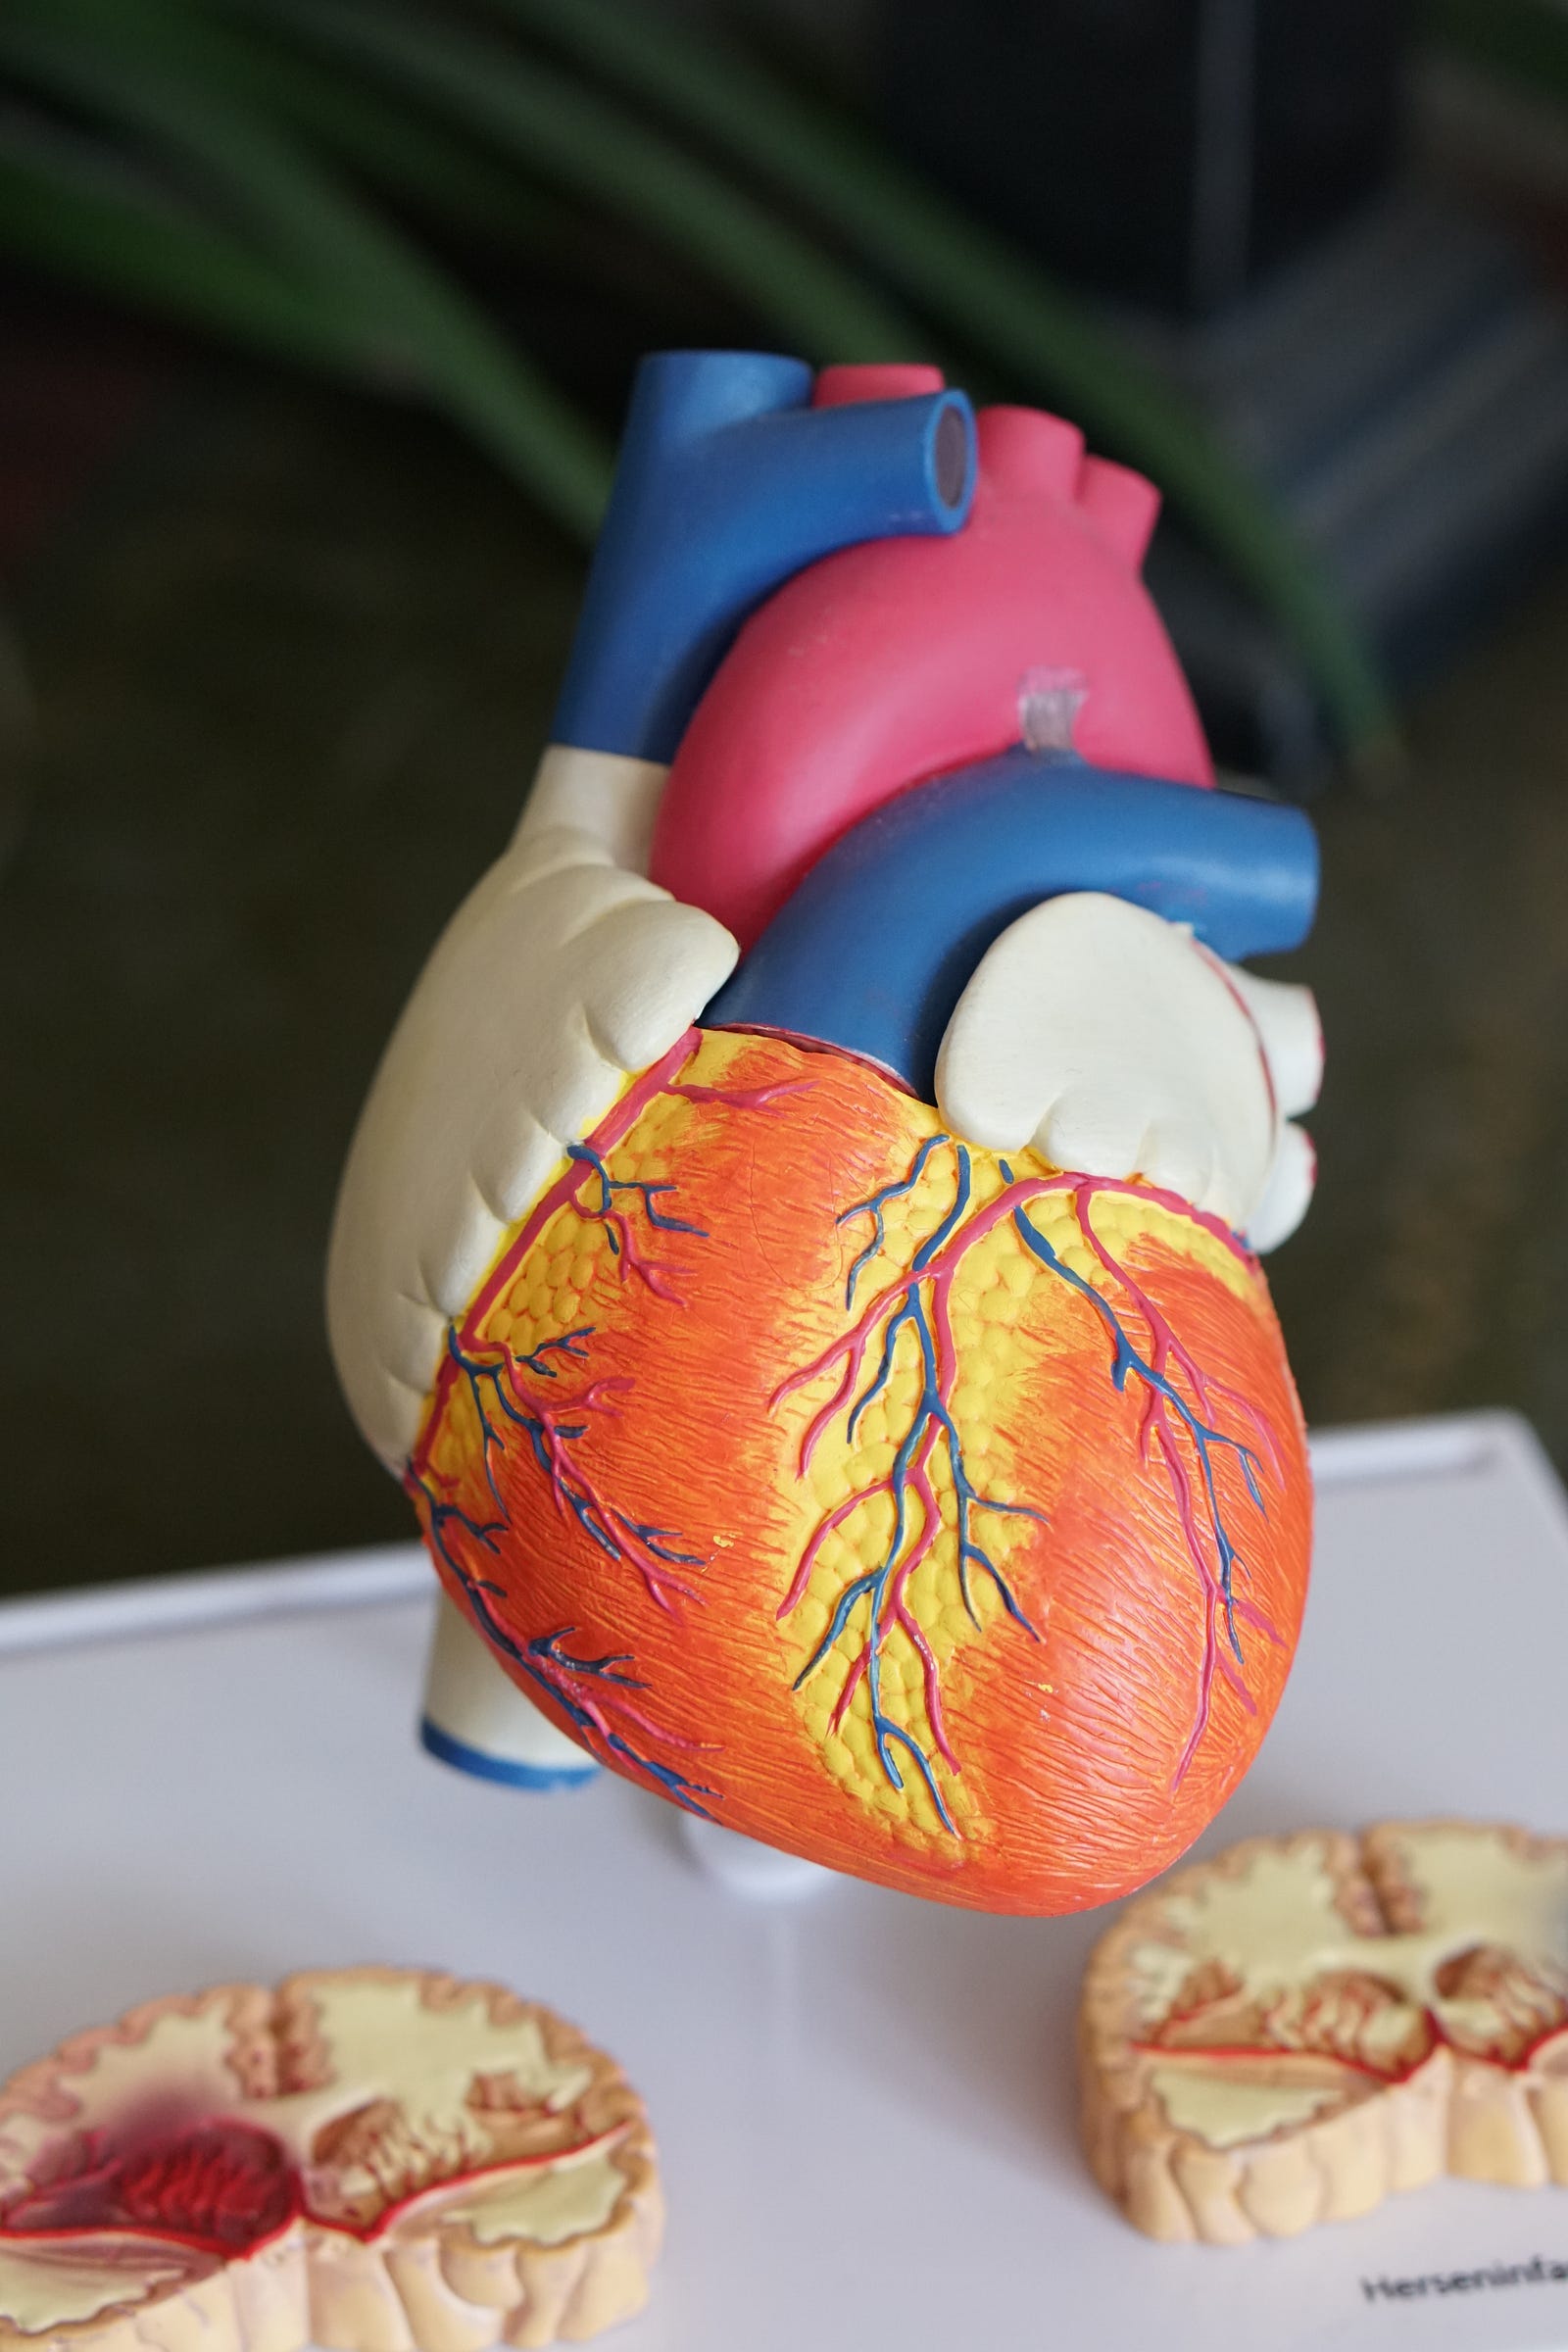 Anatomical model of a heart. Atrial fibrillation is associated with a higher risk of dementia, according to a new University of Washington (USA) study.